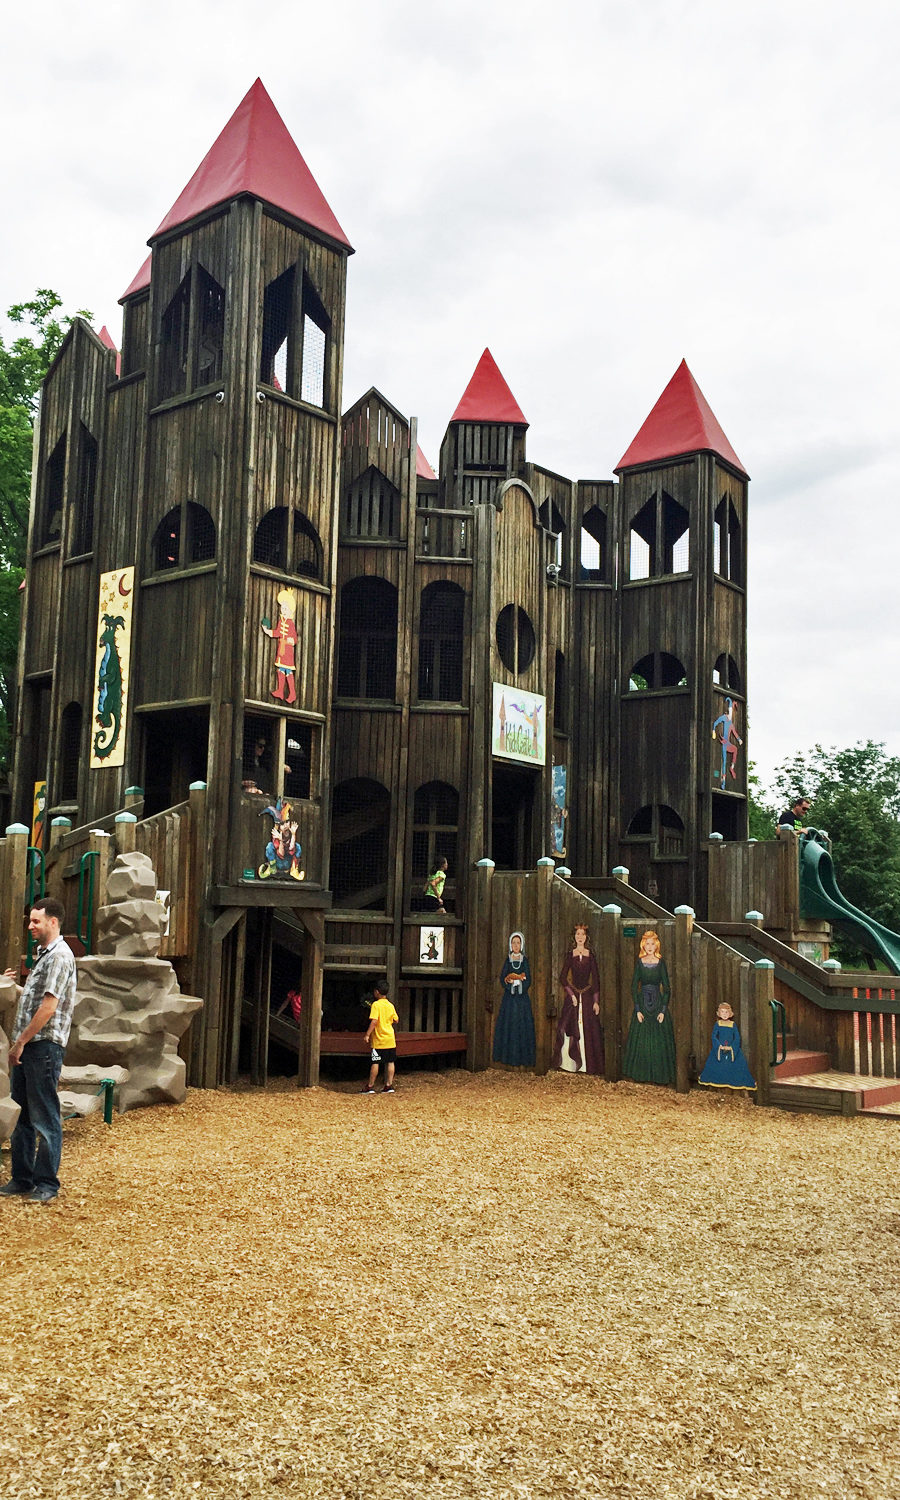 Exterior of the Castle at Kid's Castle Playground in Doylestown, PA